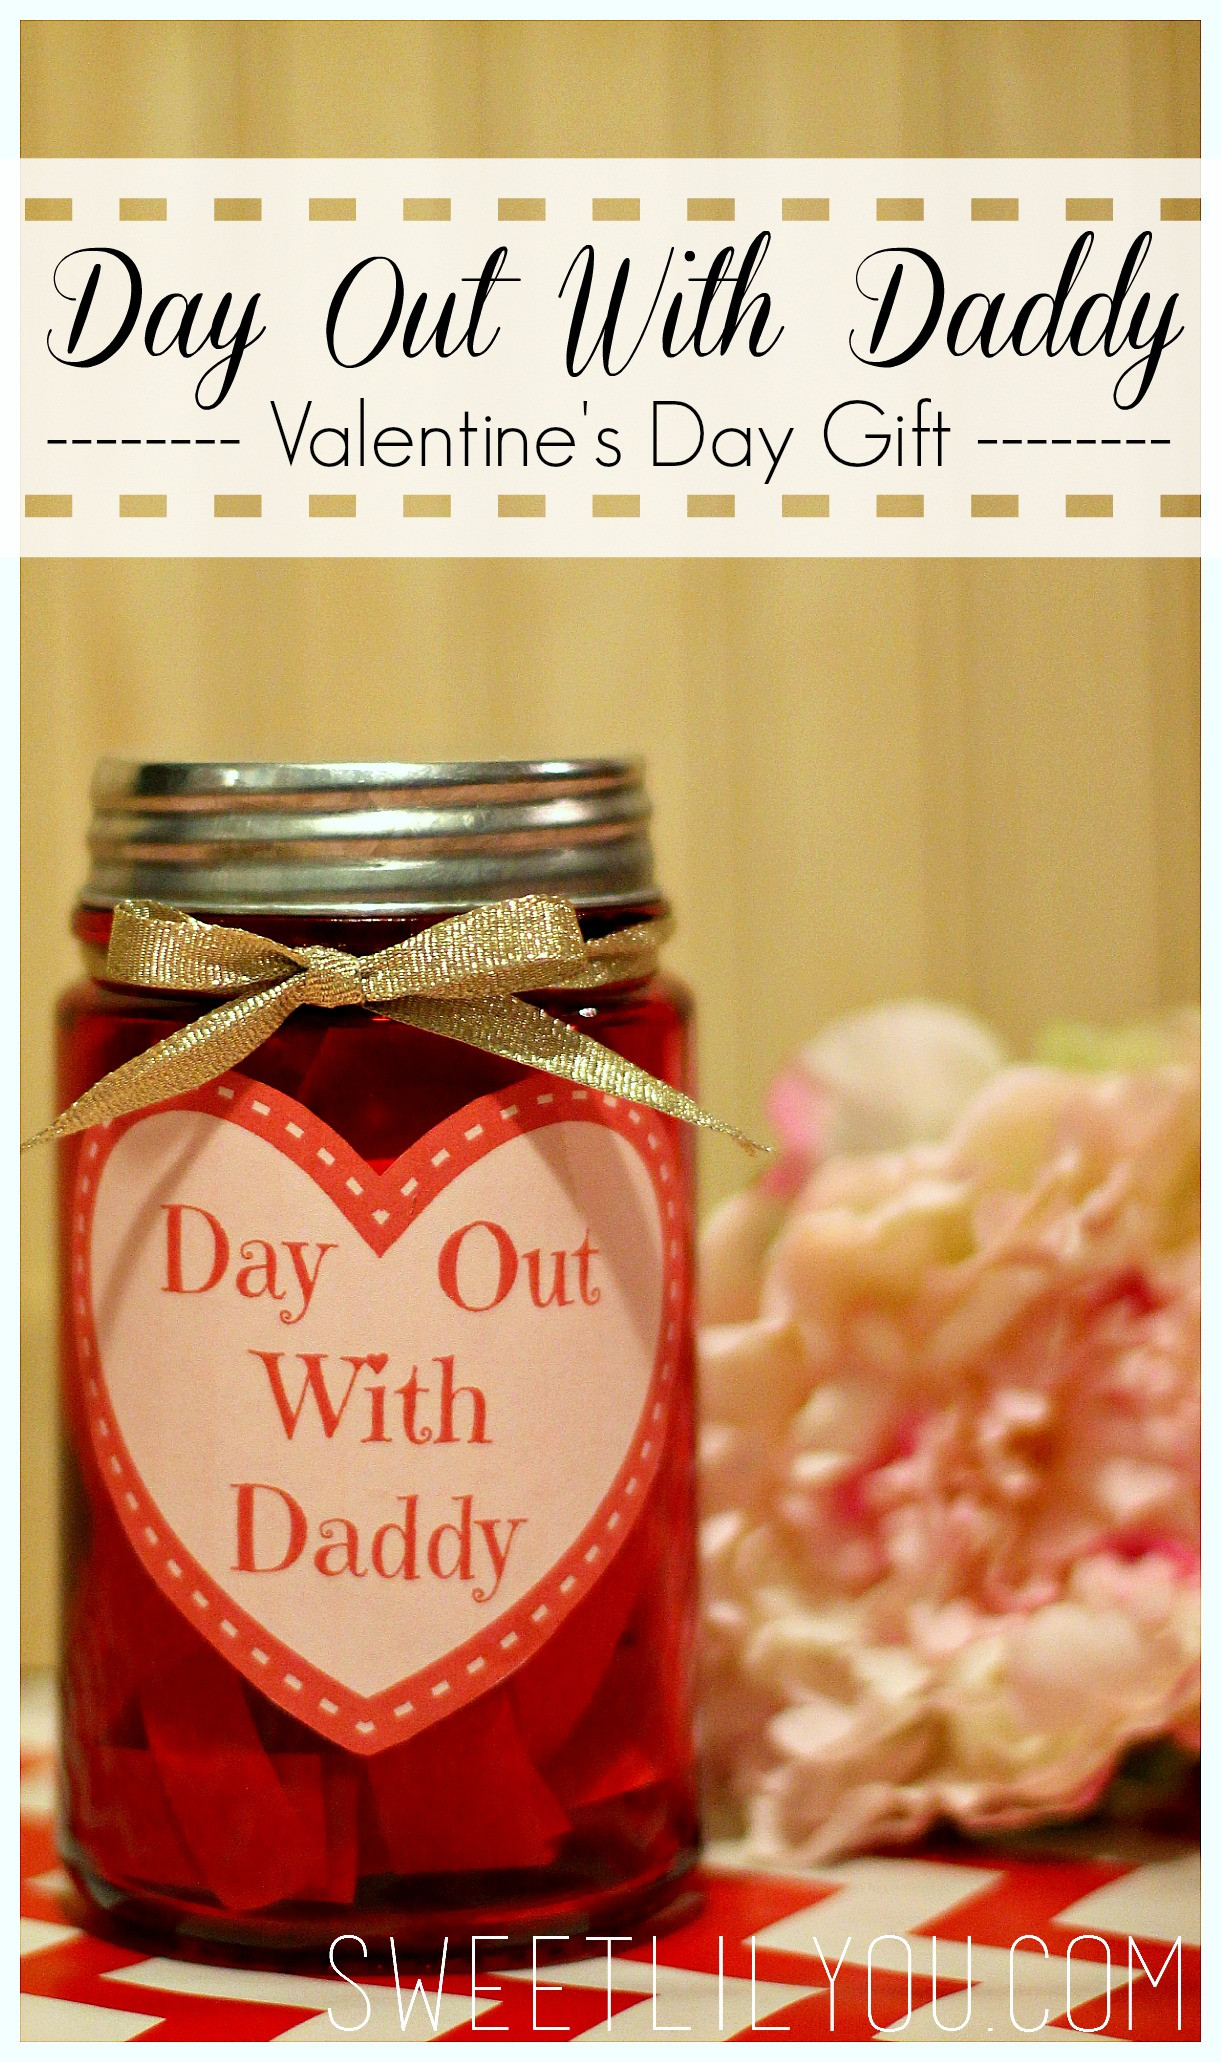 First Valentines Day Gift
 Day Out With Daddy Jar Valentine s Day Gift for Dad